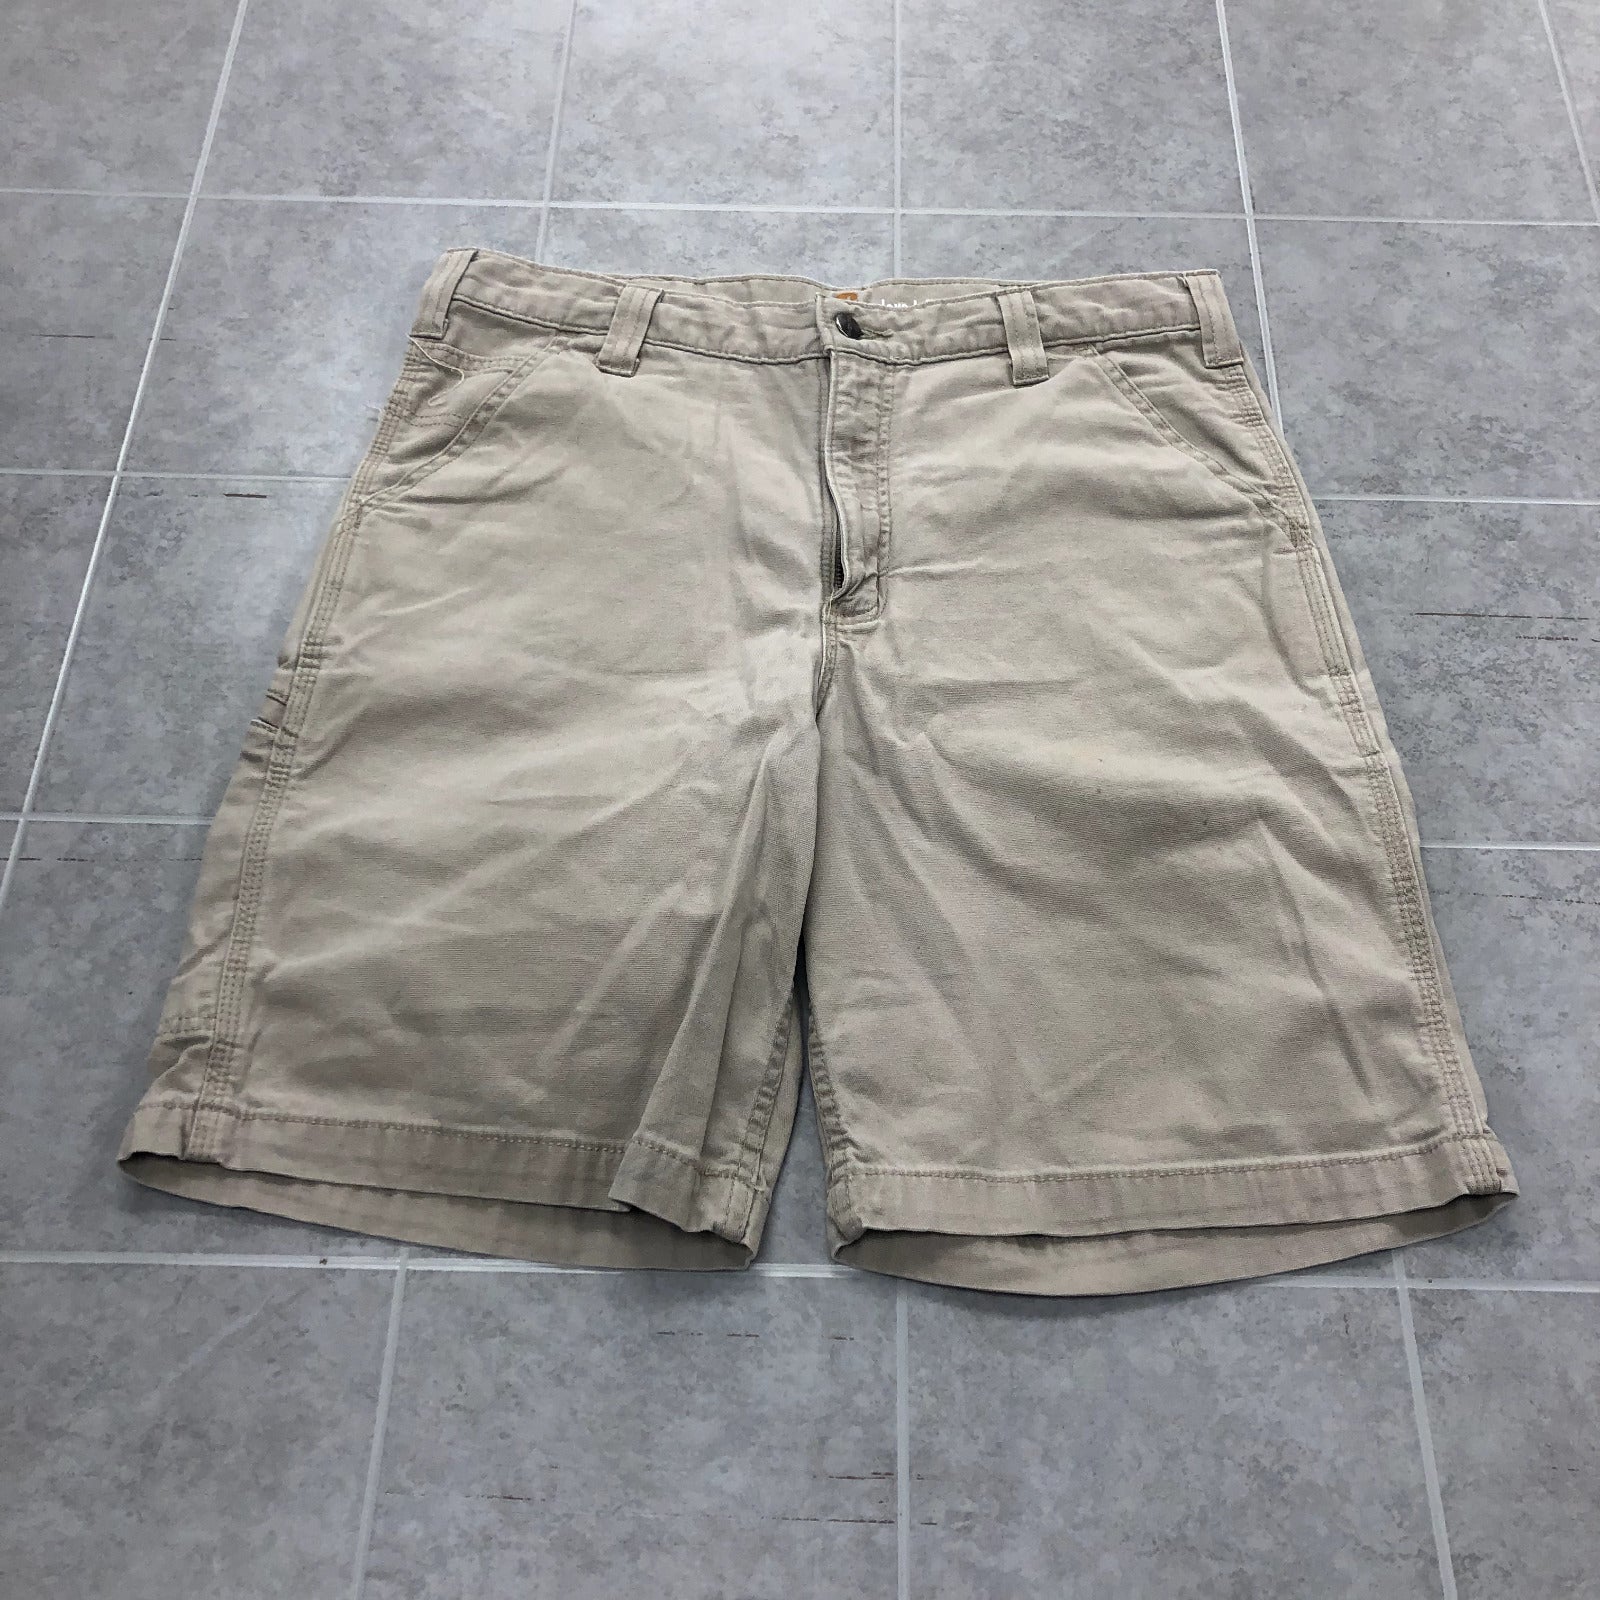 Carhartt Beige Straight legged Mid-Rise Flat Front Cargo Shorts Adult Size 34